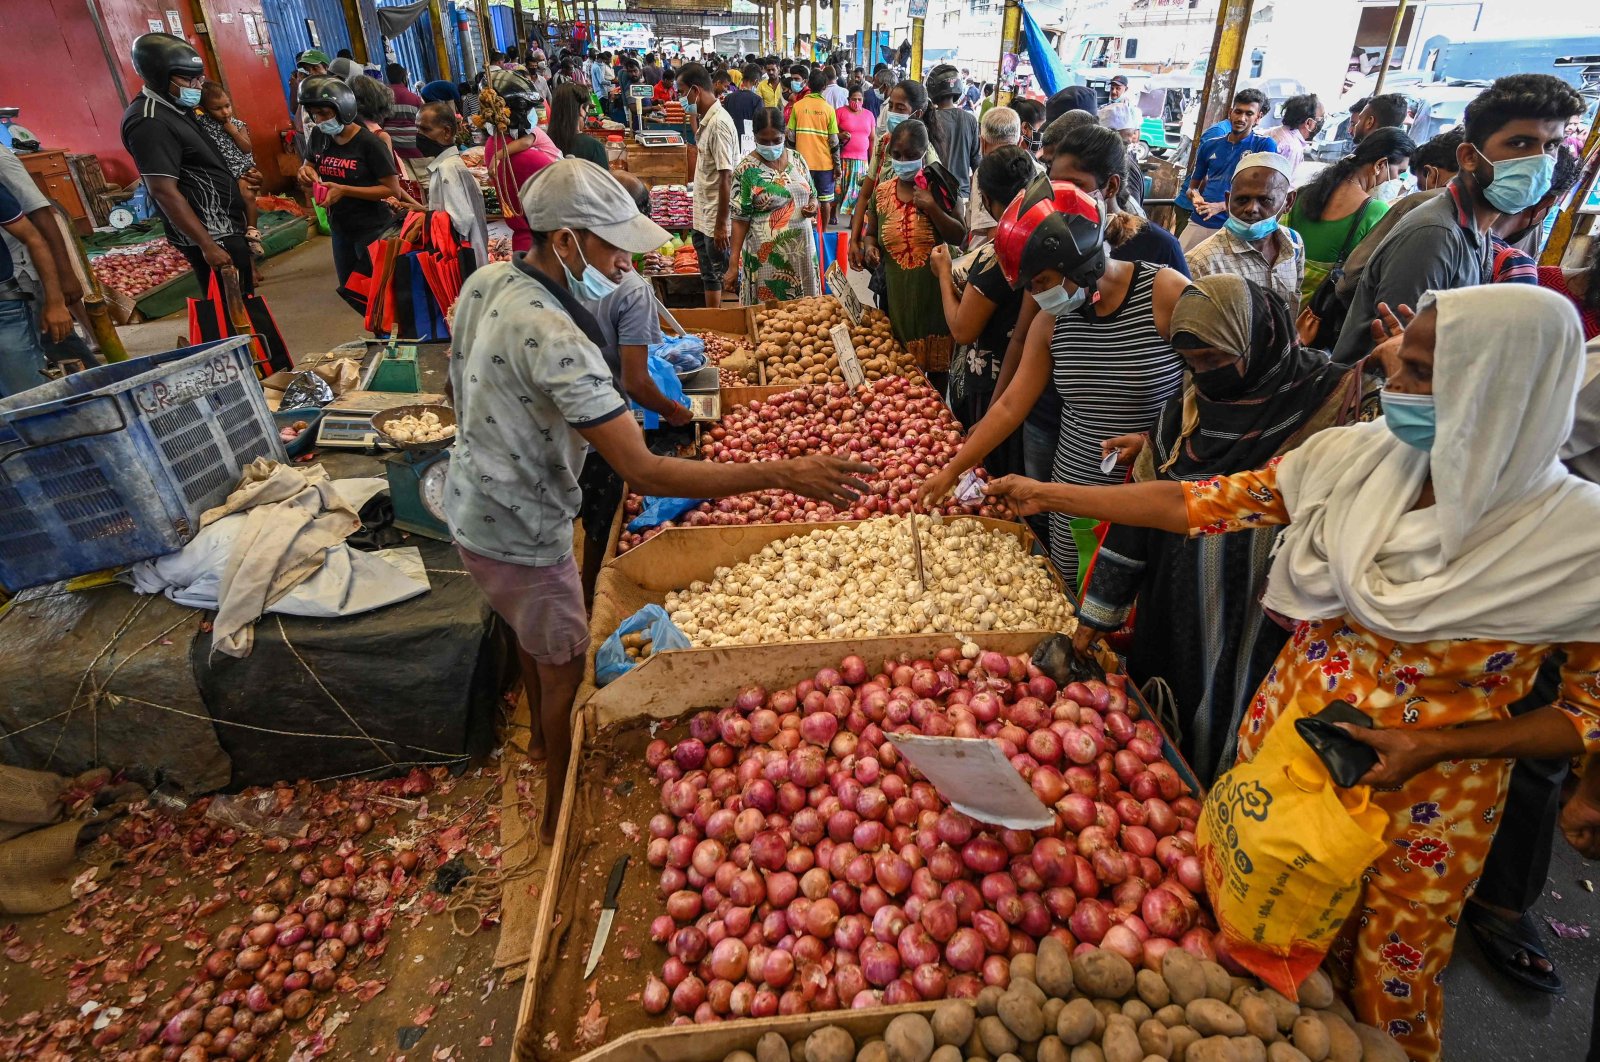 People buy vegetables at a market in Colombo, Sri Lanka, May 12, 2022. (AFP Photo)